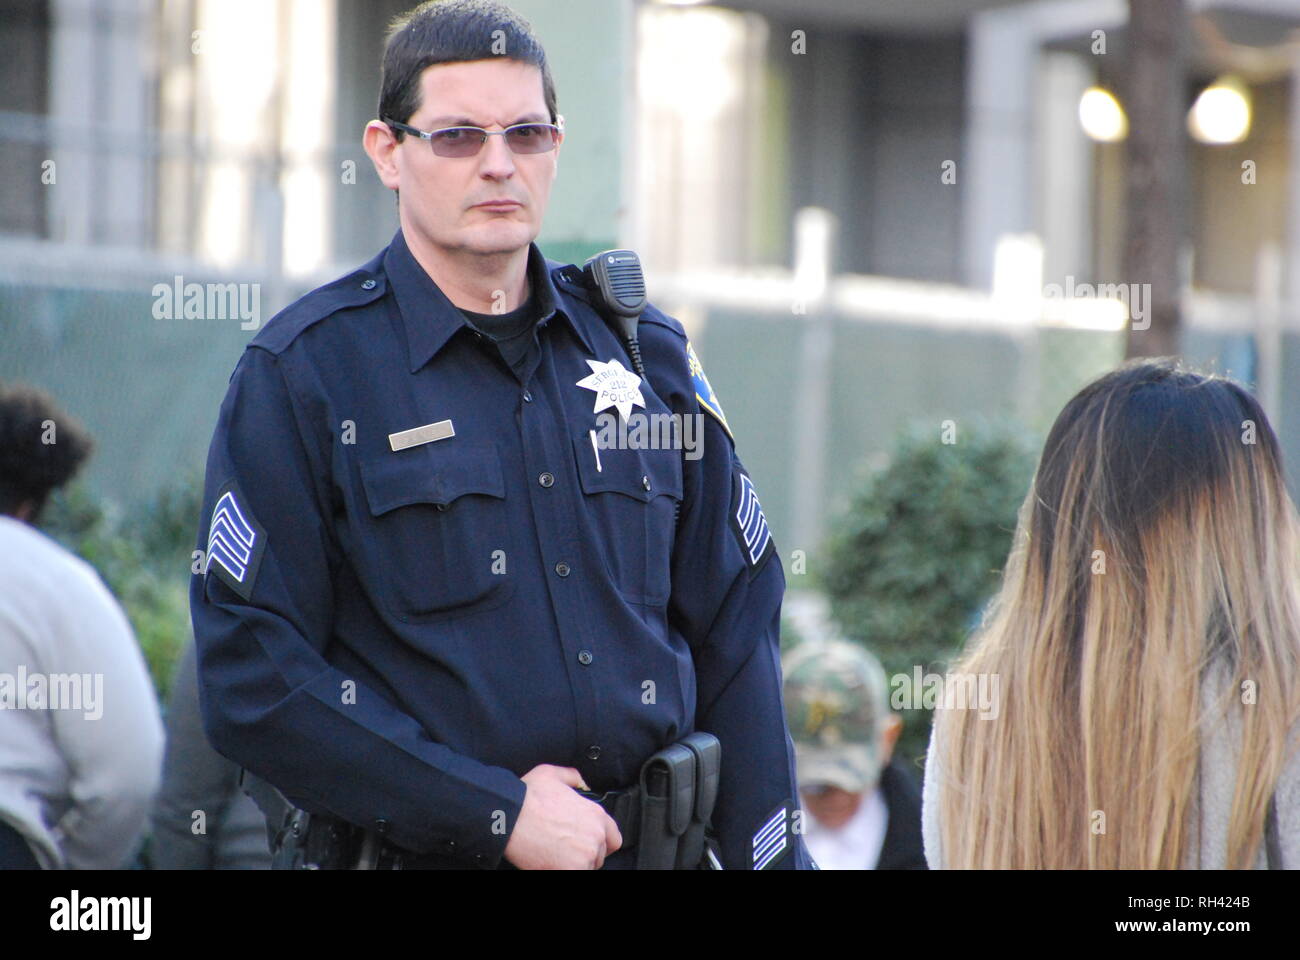 Oakland police Sgt. Barry Donelan, president of the Oakland Police Officers Association, providing security outside a Kamala Harris for President rally in downtown Oakland on Jan. 27, 2019. Stock Photo